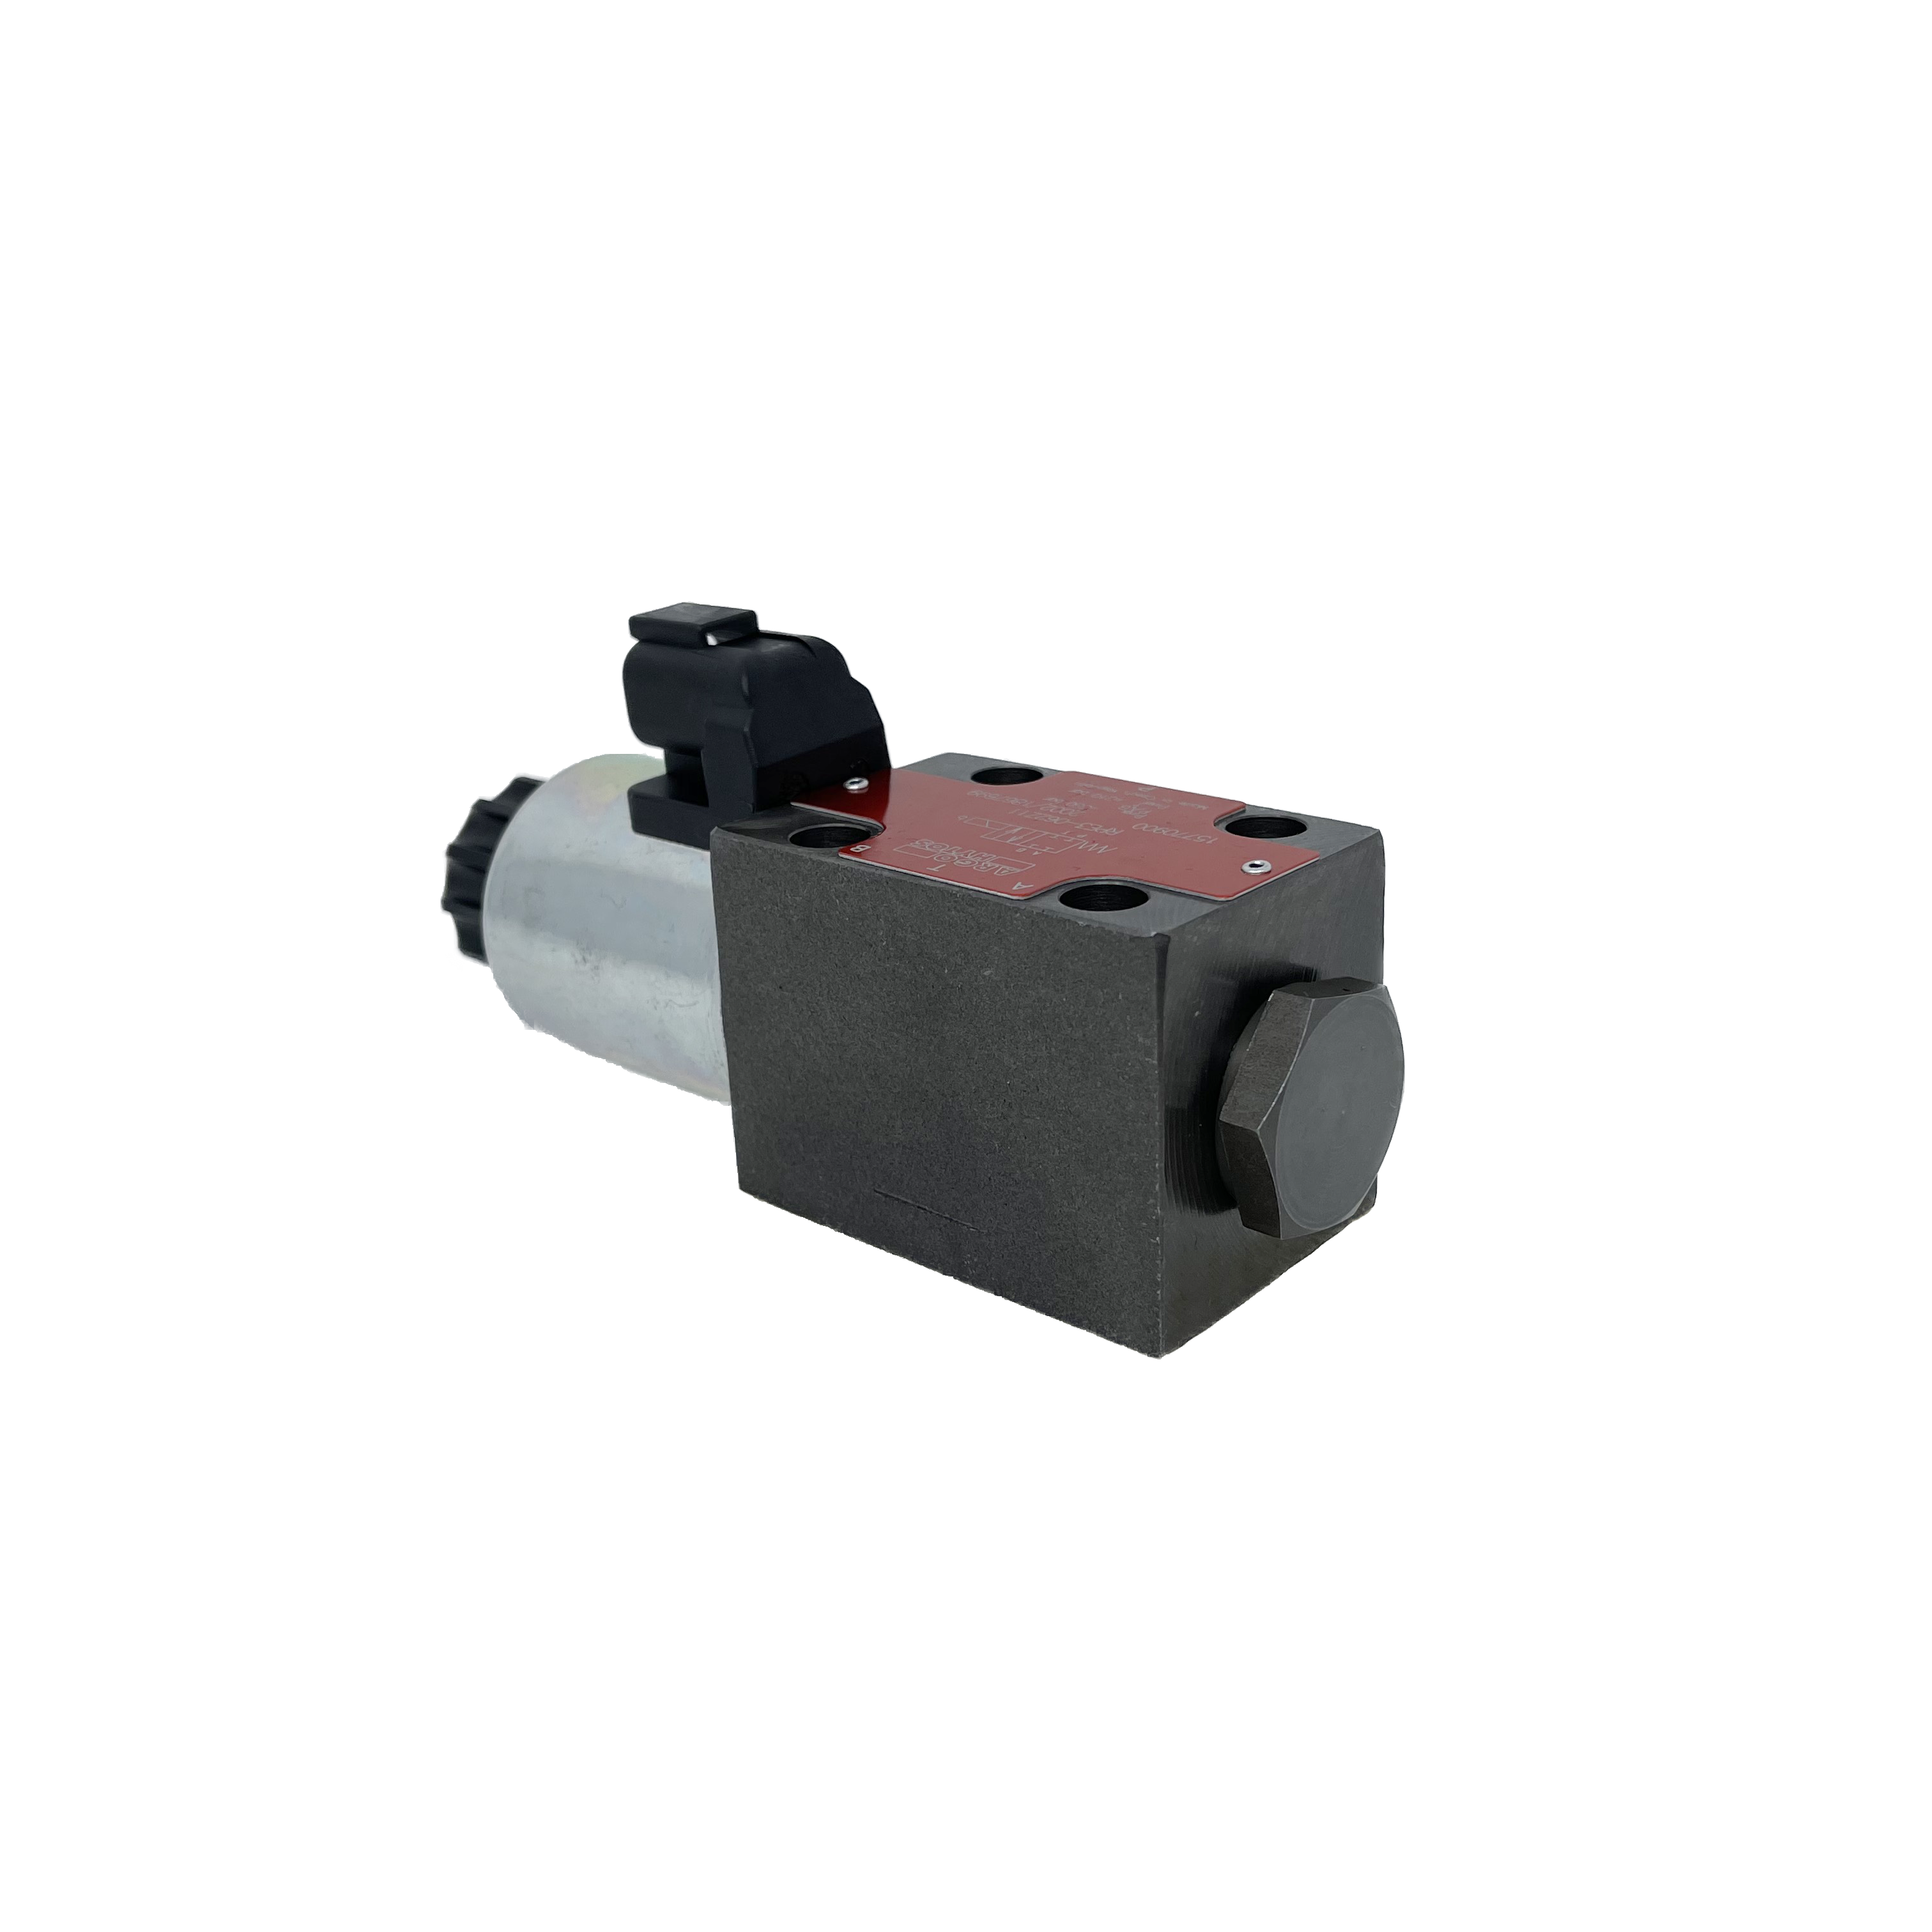 RPE3-062Z11/02400E12A : Argo Hytos Directional Control Valve, D03 (NG6), 21GPM, 5100psi, 2P4W, 24 VDC, Deutsch, Spring Return, All Ports Blocked in Neutral, Coil Side B